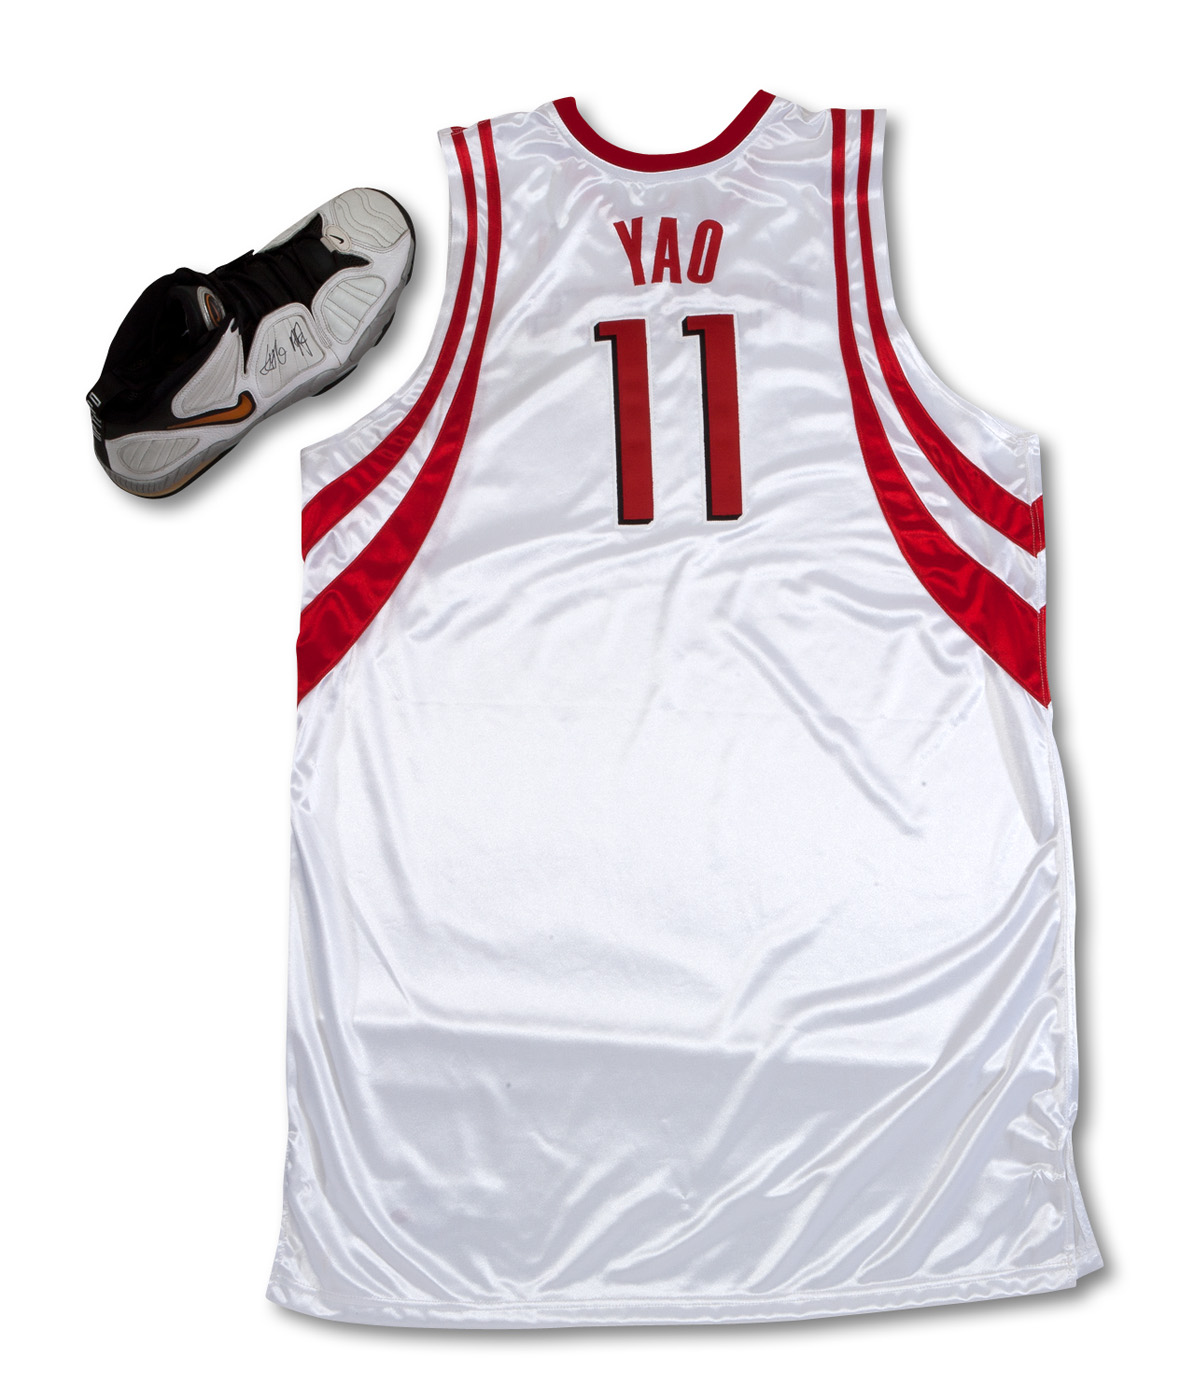 yao ming autographed jersey